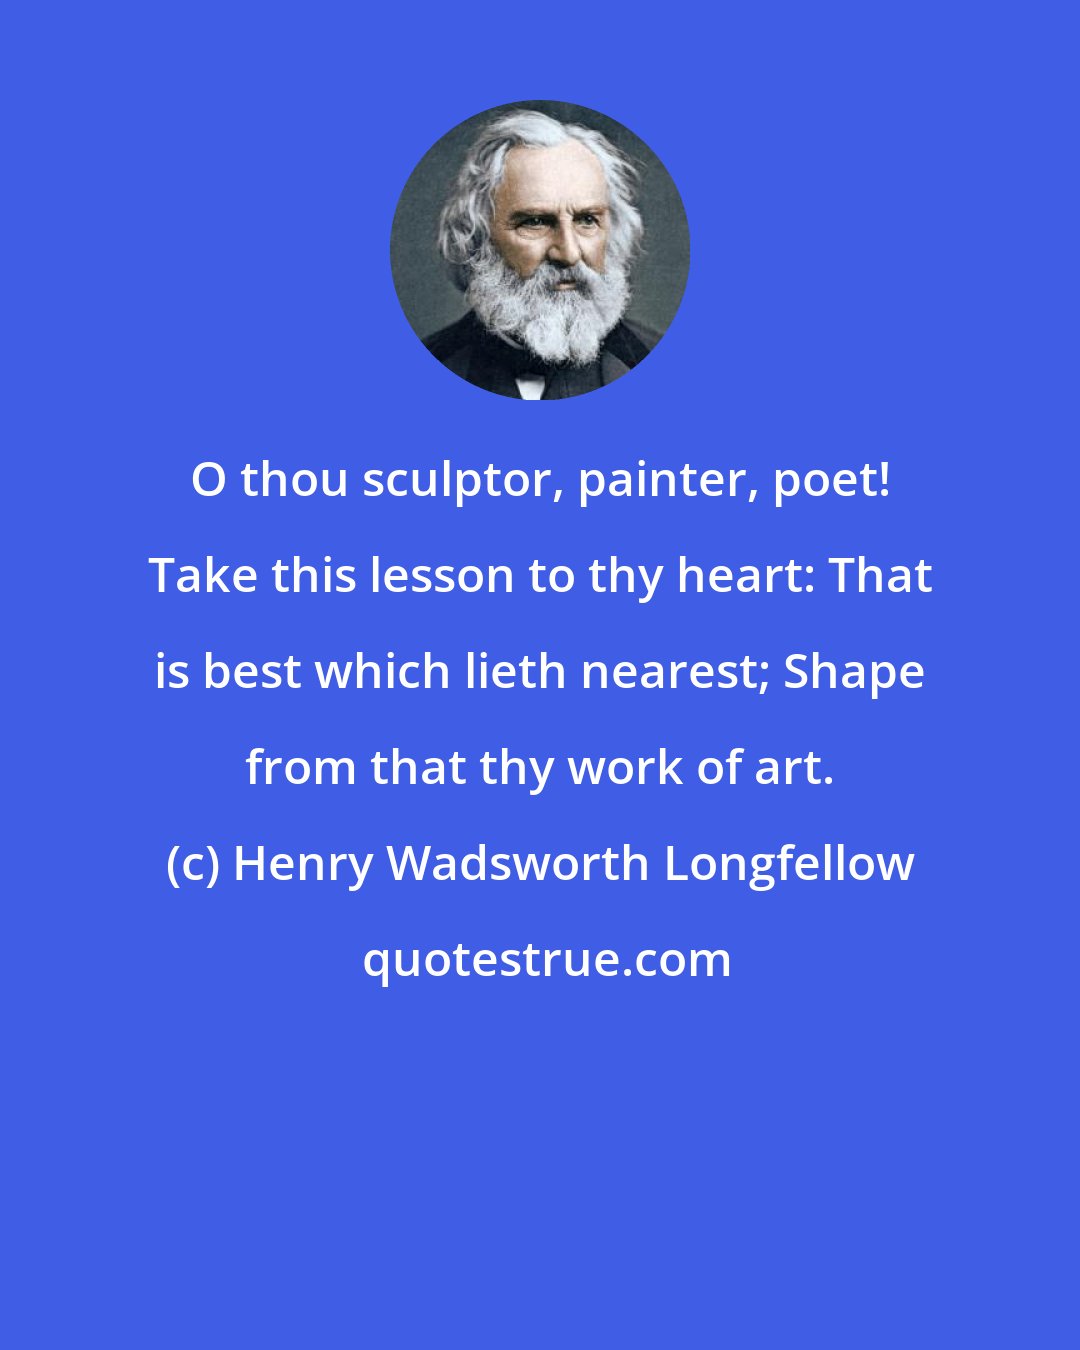 Henry Wadsworth Longfellow: O thou sculptor, painter, poet! Take this lesson to thy heart: That is best which lieth nearest; Shape from that thy work of art.